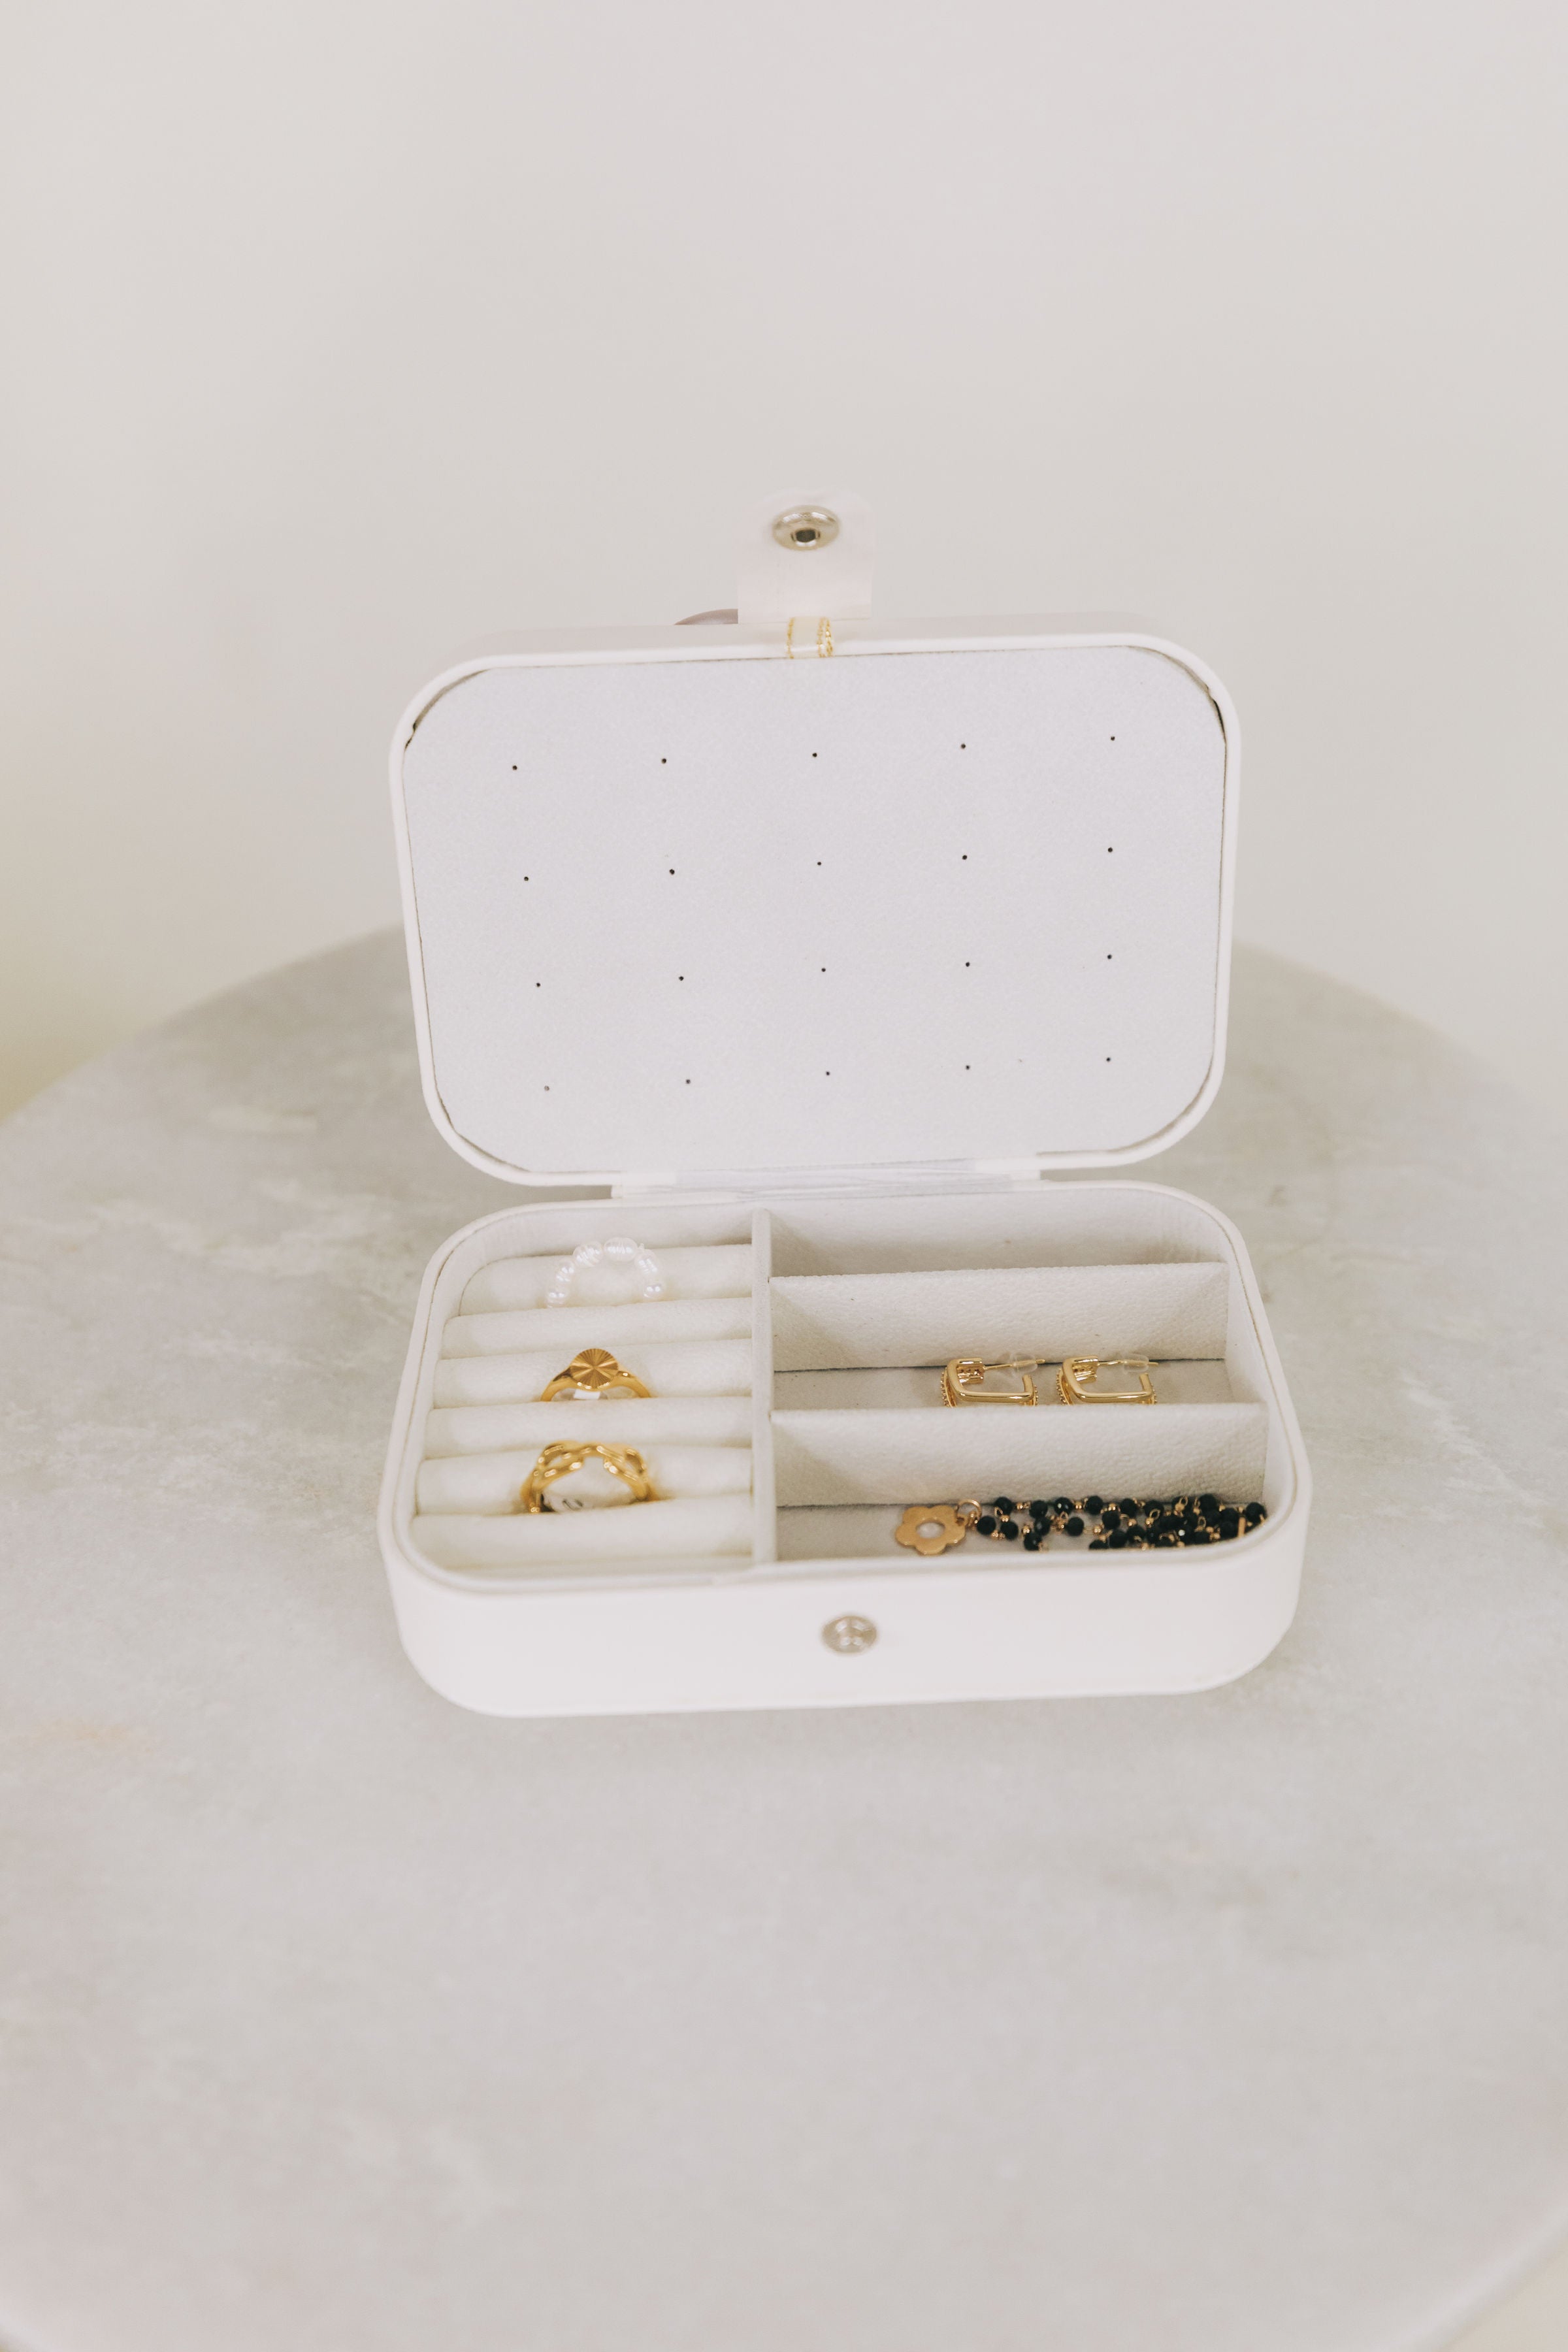 Big Picture Travel Jewelry Case- New Color!